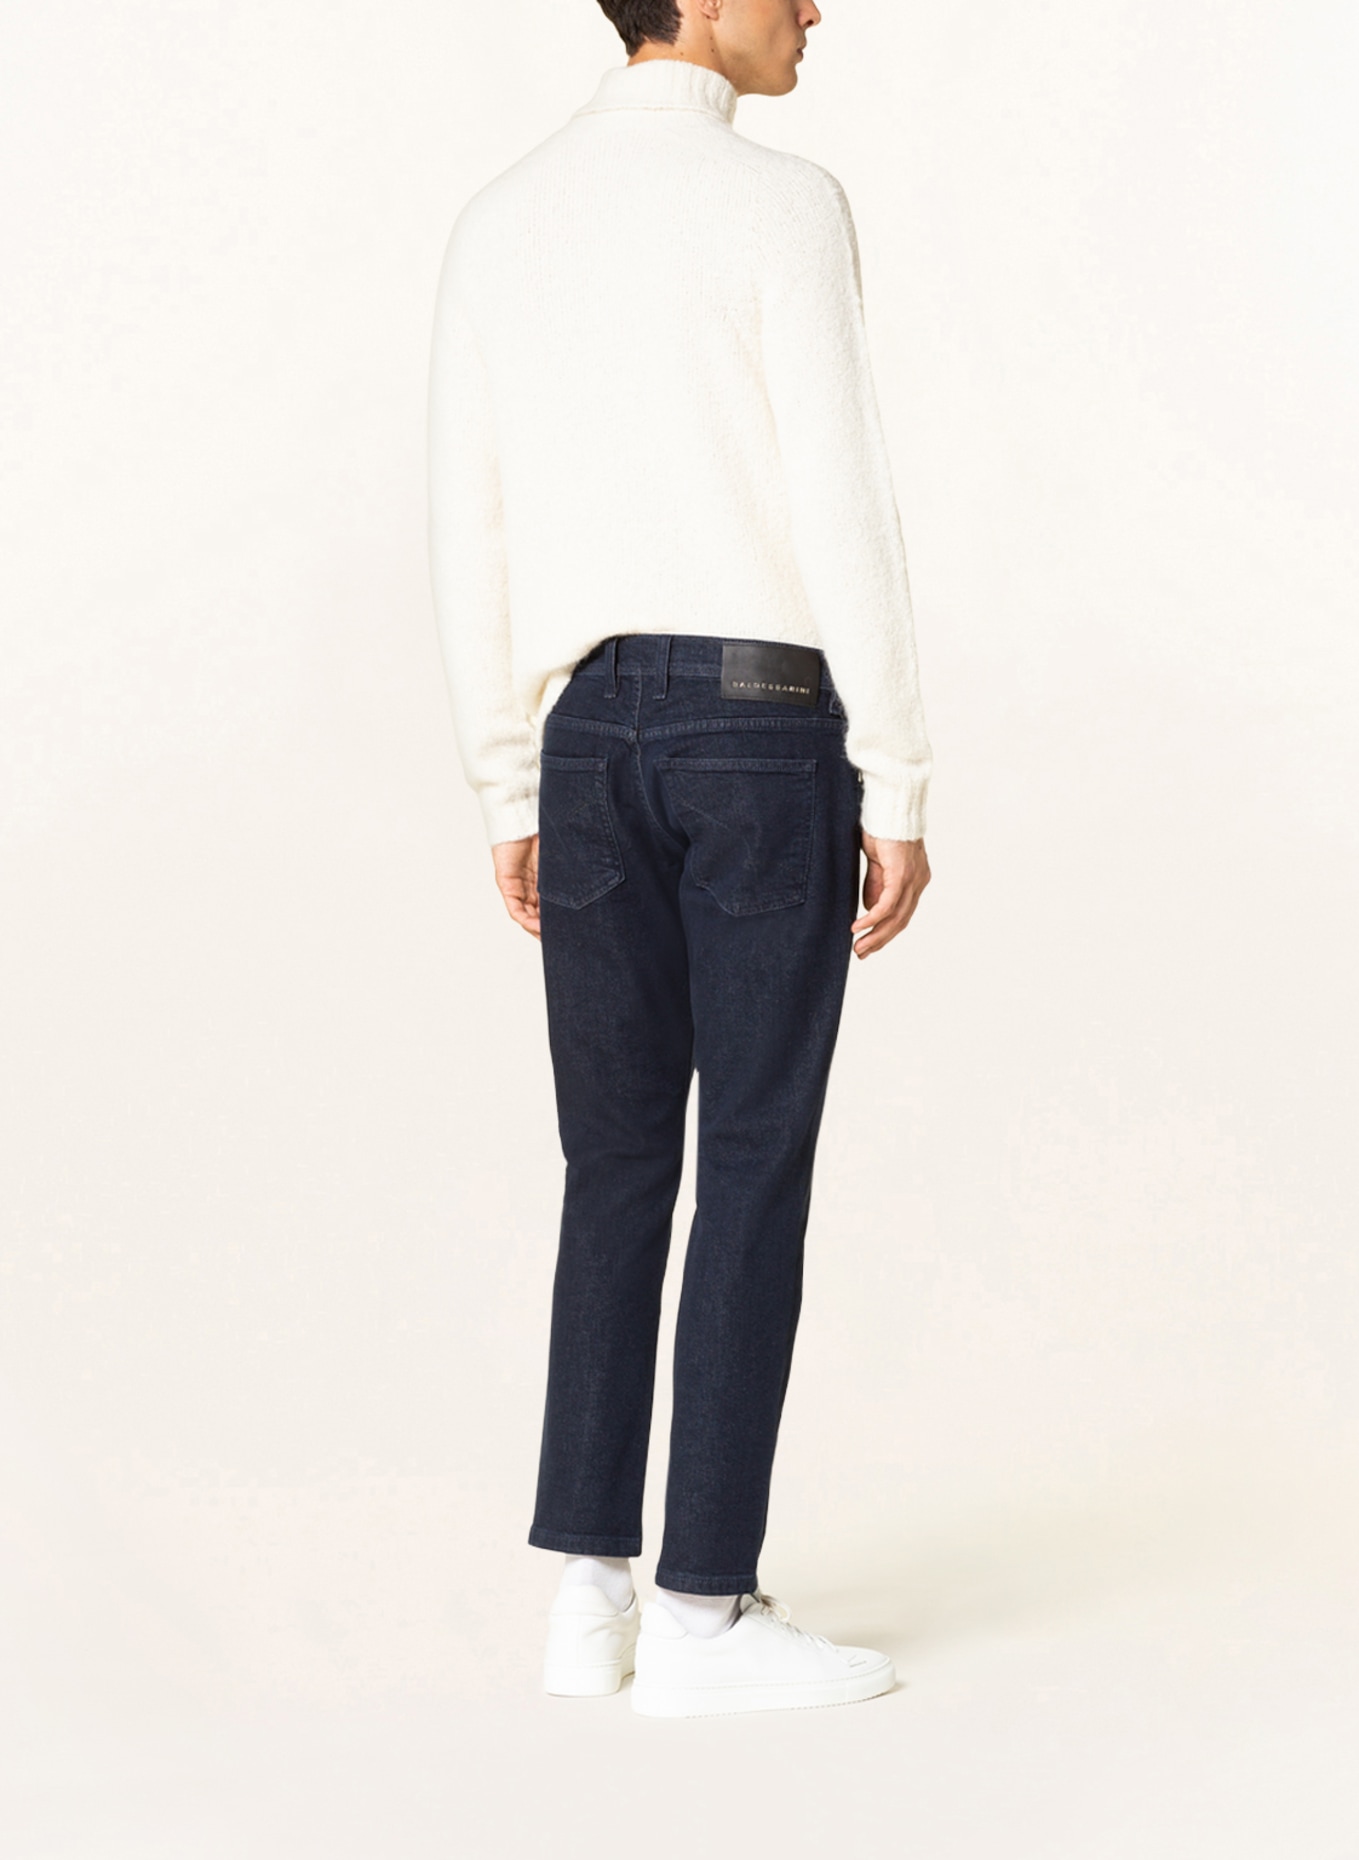 BALDESSARINI Jeans Tapered fit, Color: 6810 dark blue raw (Image 3)